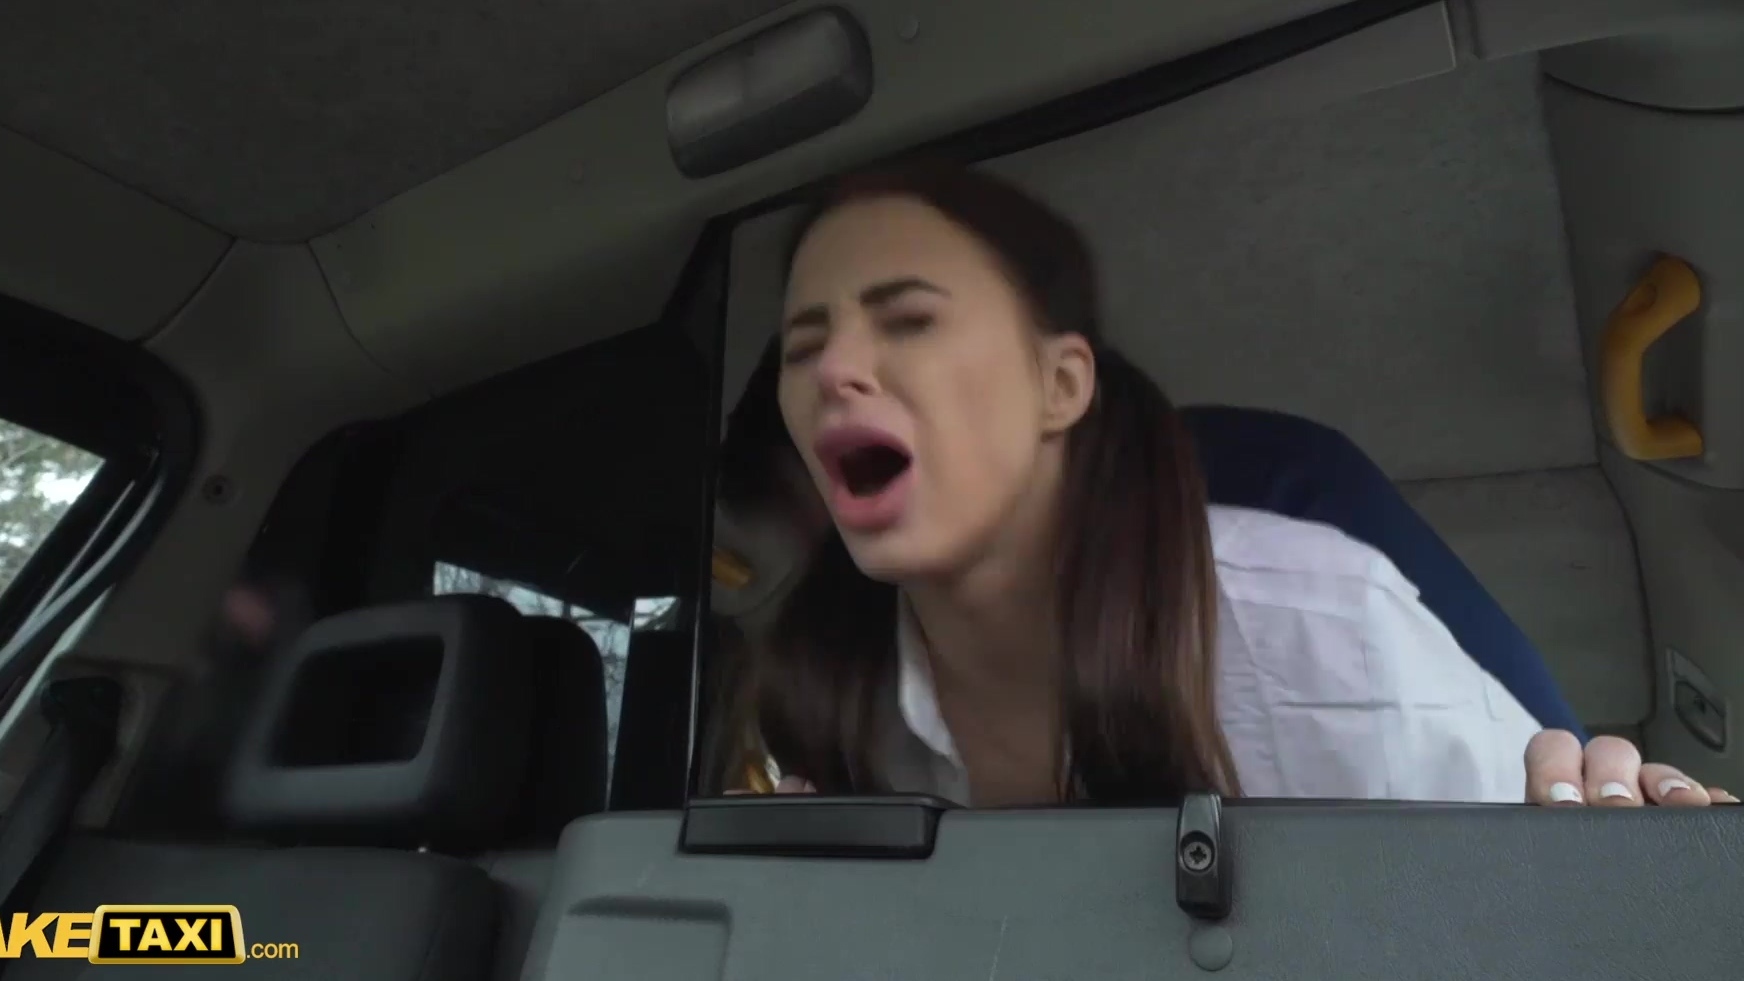 Taxi Cab Gangbang Porn - Brunette teen pays her fire by excellent sex skills in a taxi cab